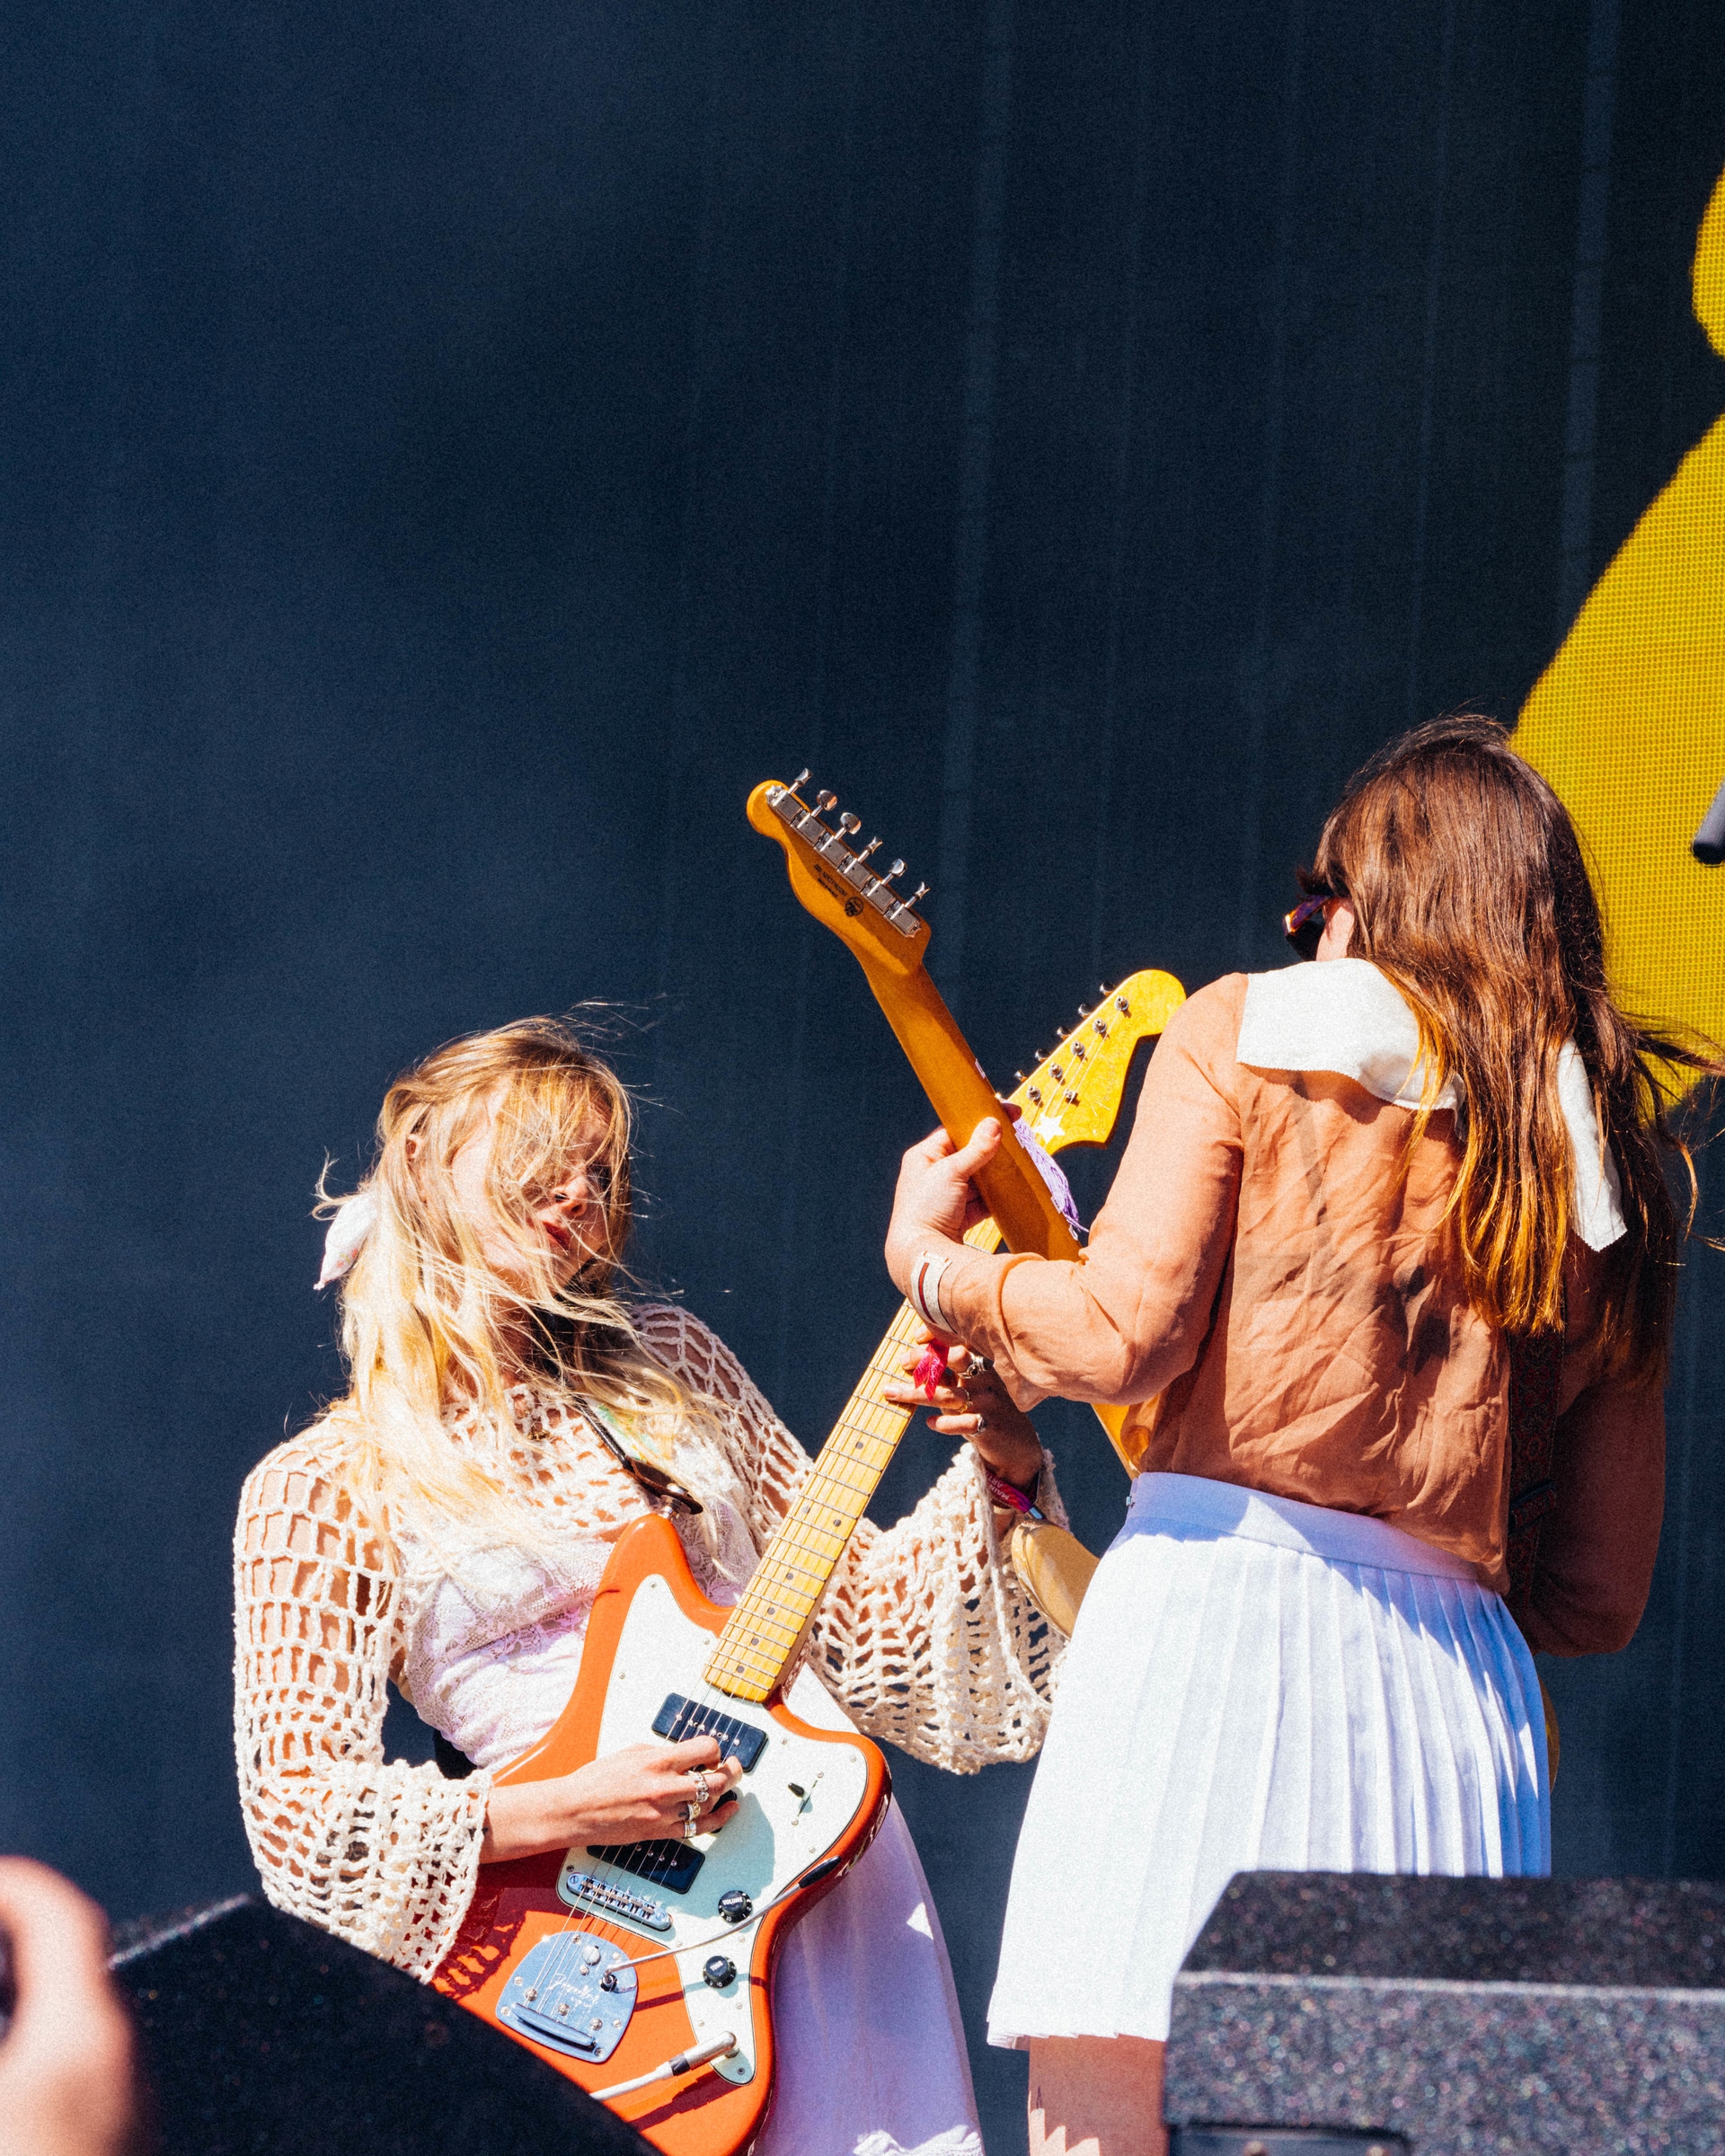 Wet Leg were among the most anticipated acts at TRNSMT after their Glastonbury slot. (Image: TRNSMT)